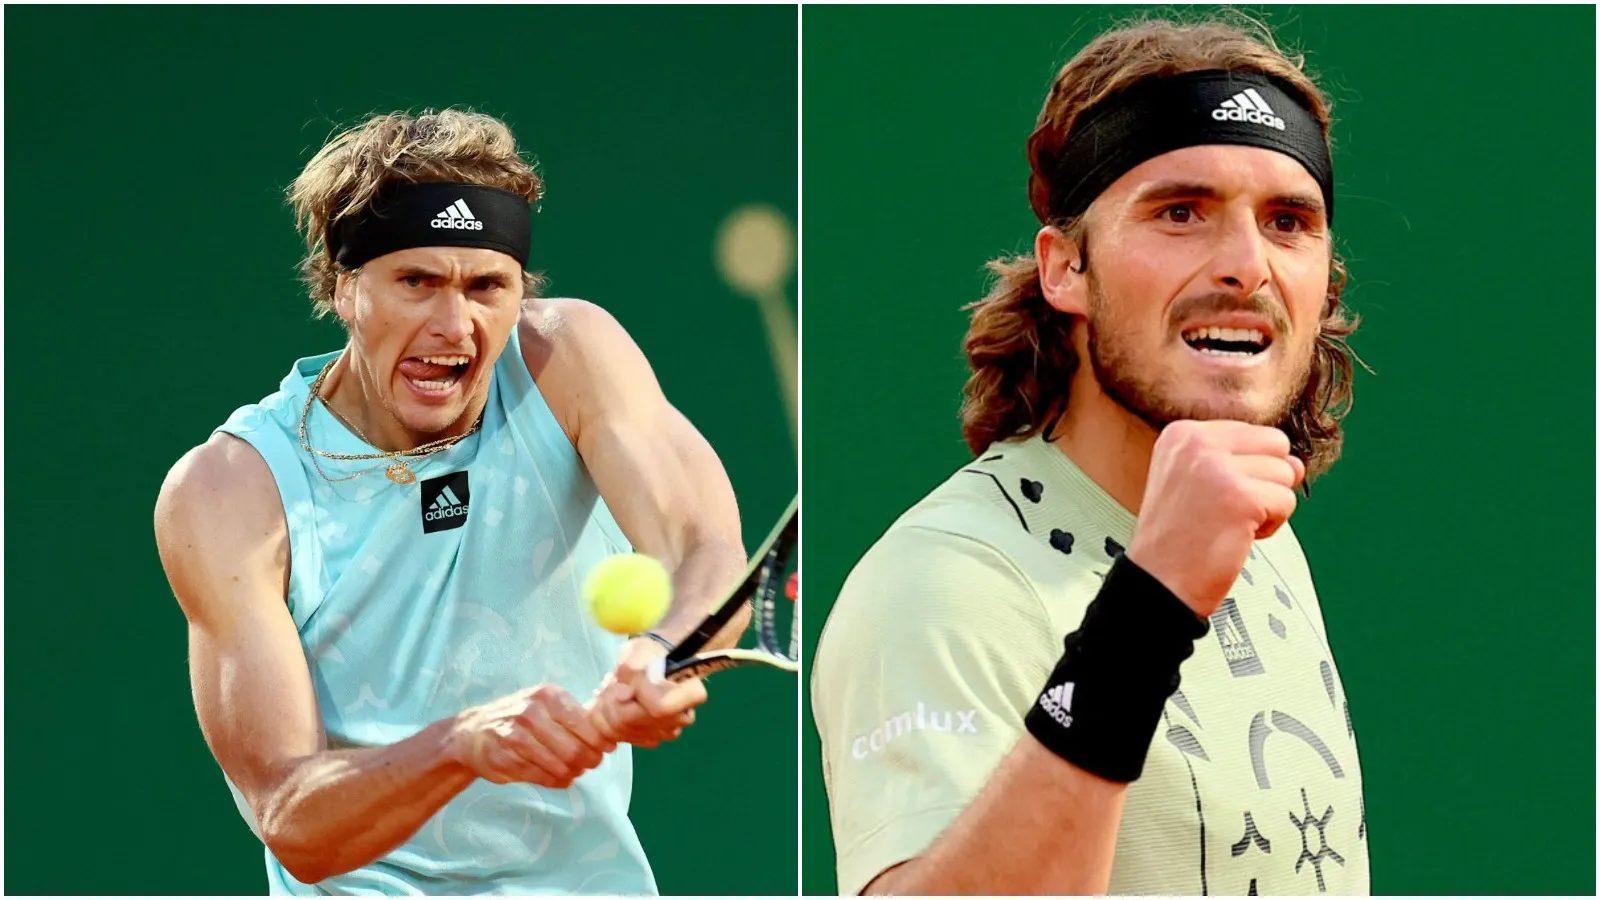 Alexander Zverev vs Stefanos Tsitsipas Match Prediction, Preview, Head-to-head, Betting tips and Live Streams